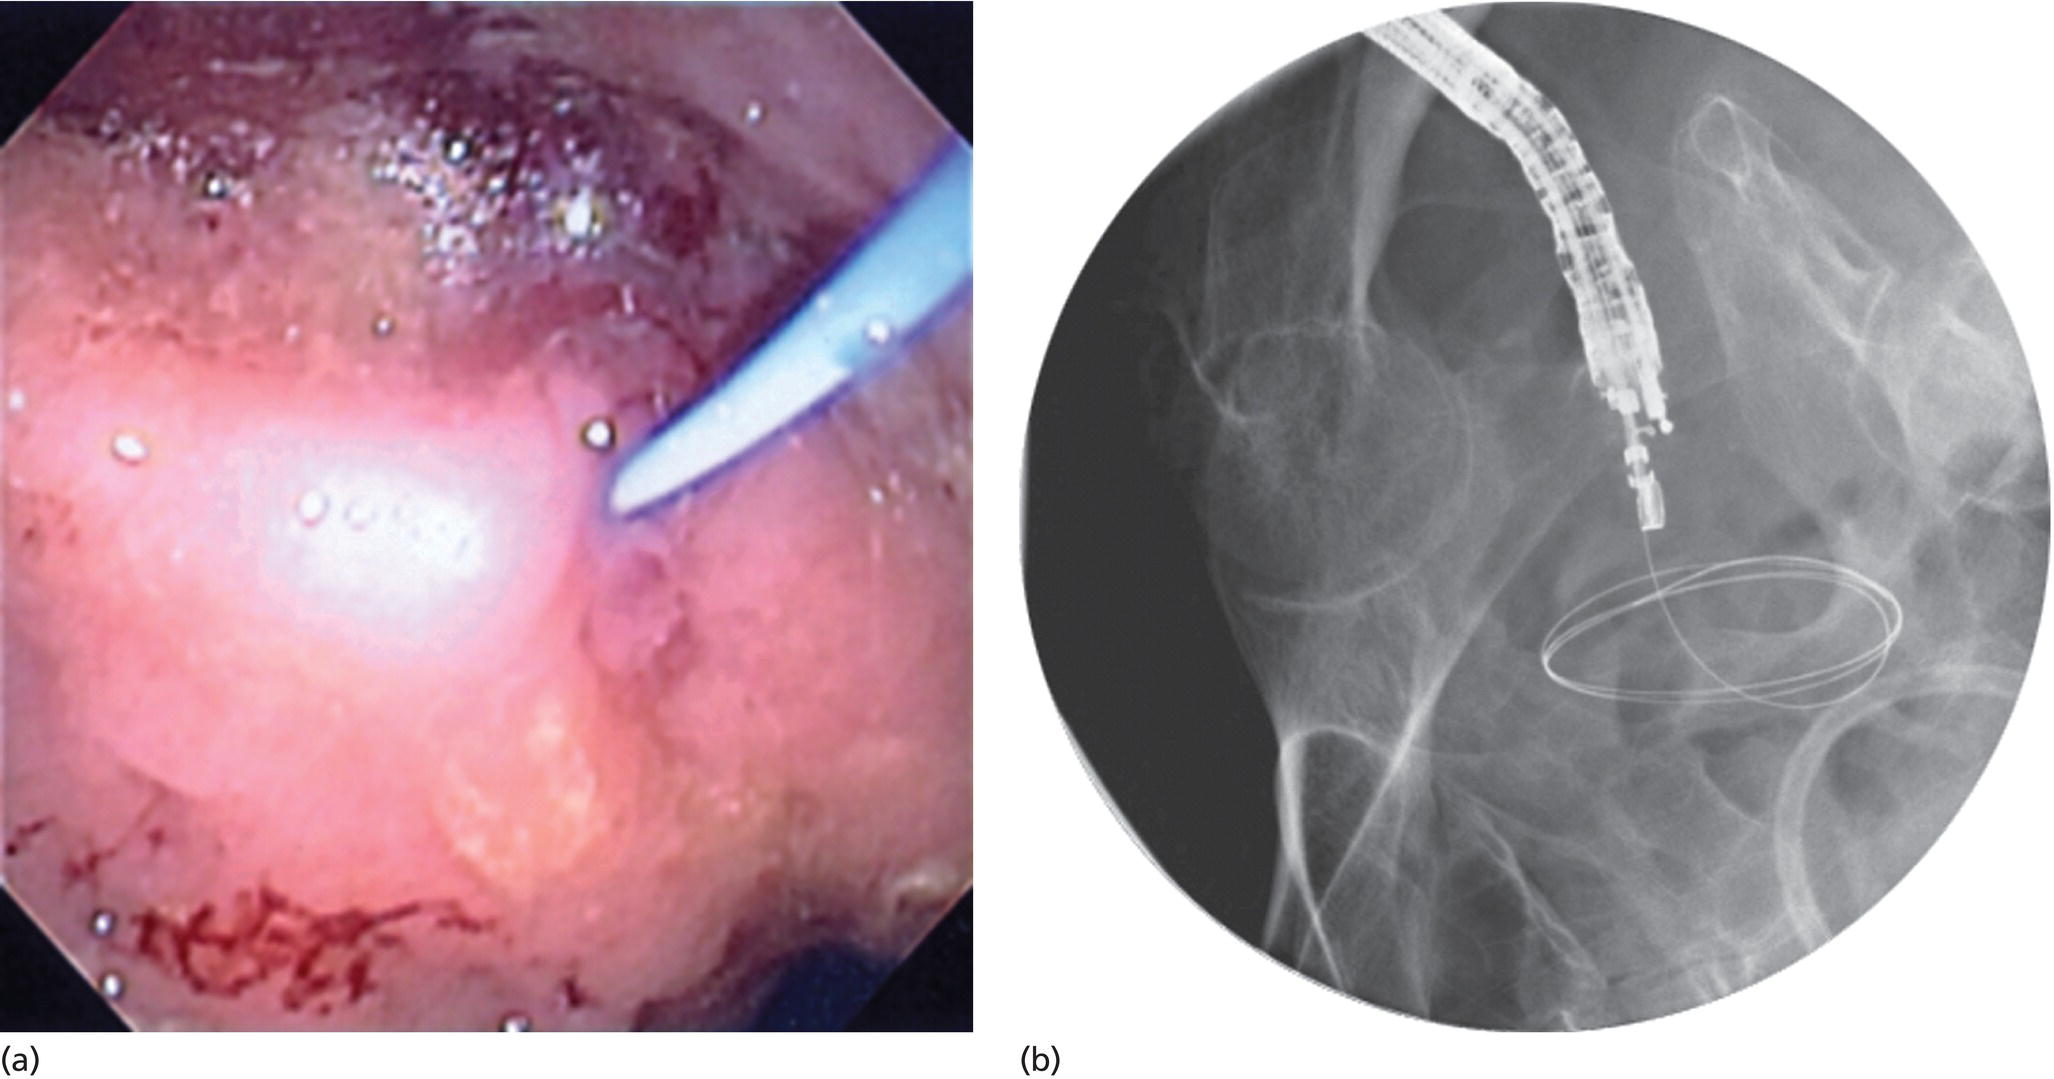 Photos depict a 0.035-inch guidewire is then coiled within the abscess cavity: (a) endoscopy view; (b) confirmed by fluoroscopy.